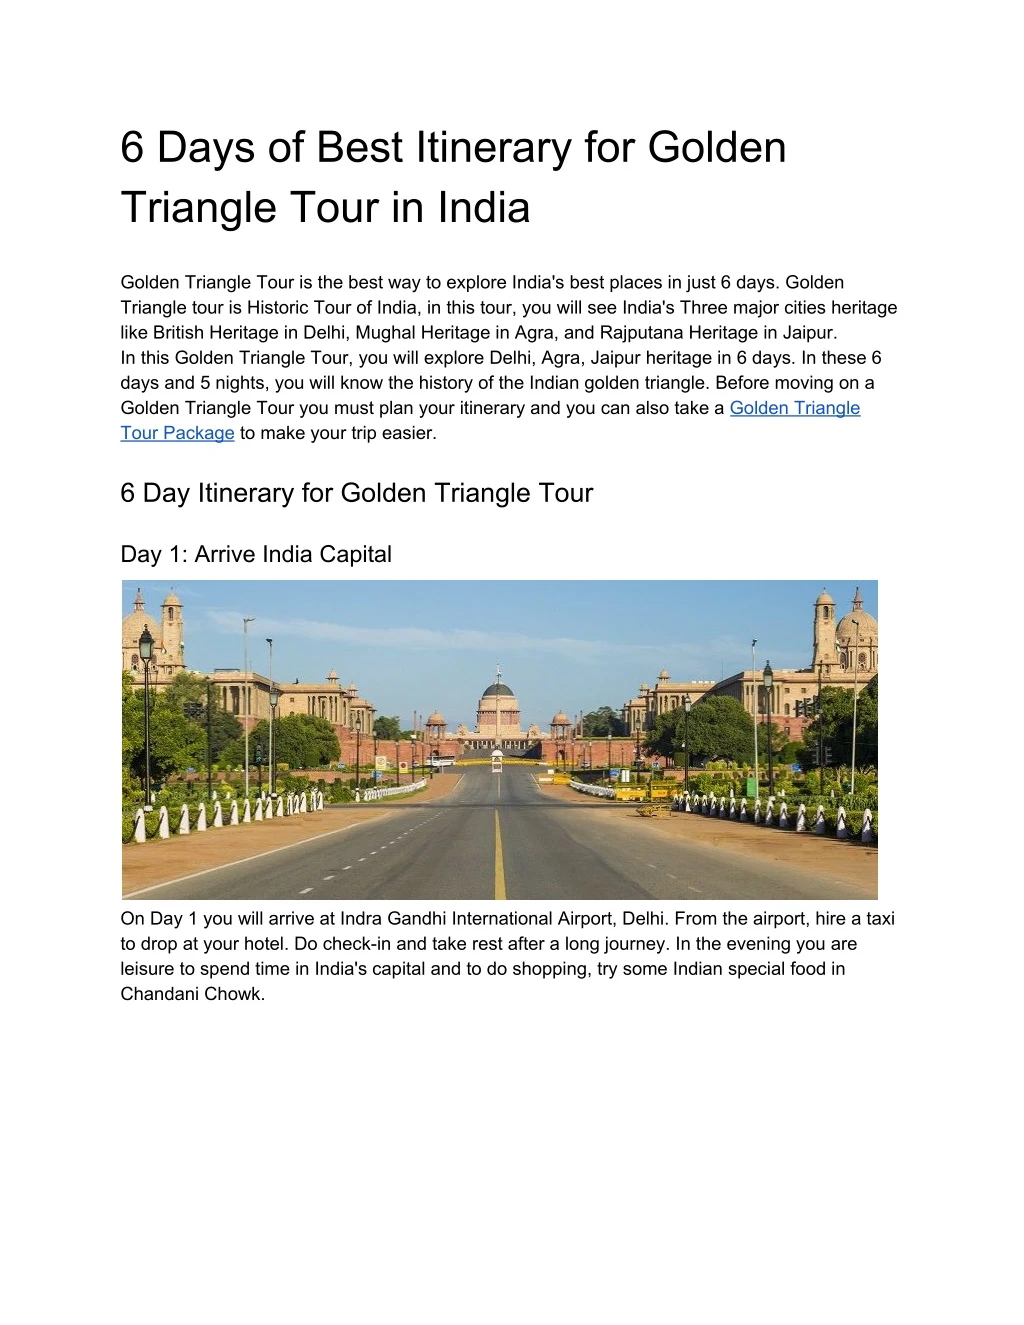 6 days of best itinerary for golden triangle tour